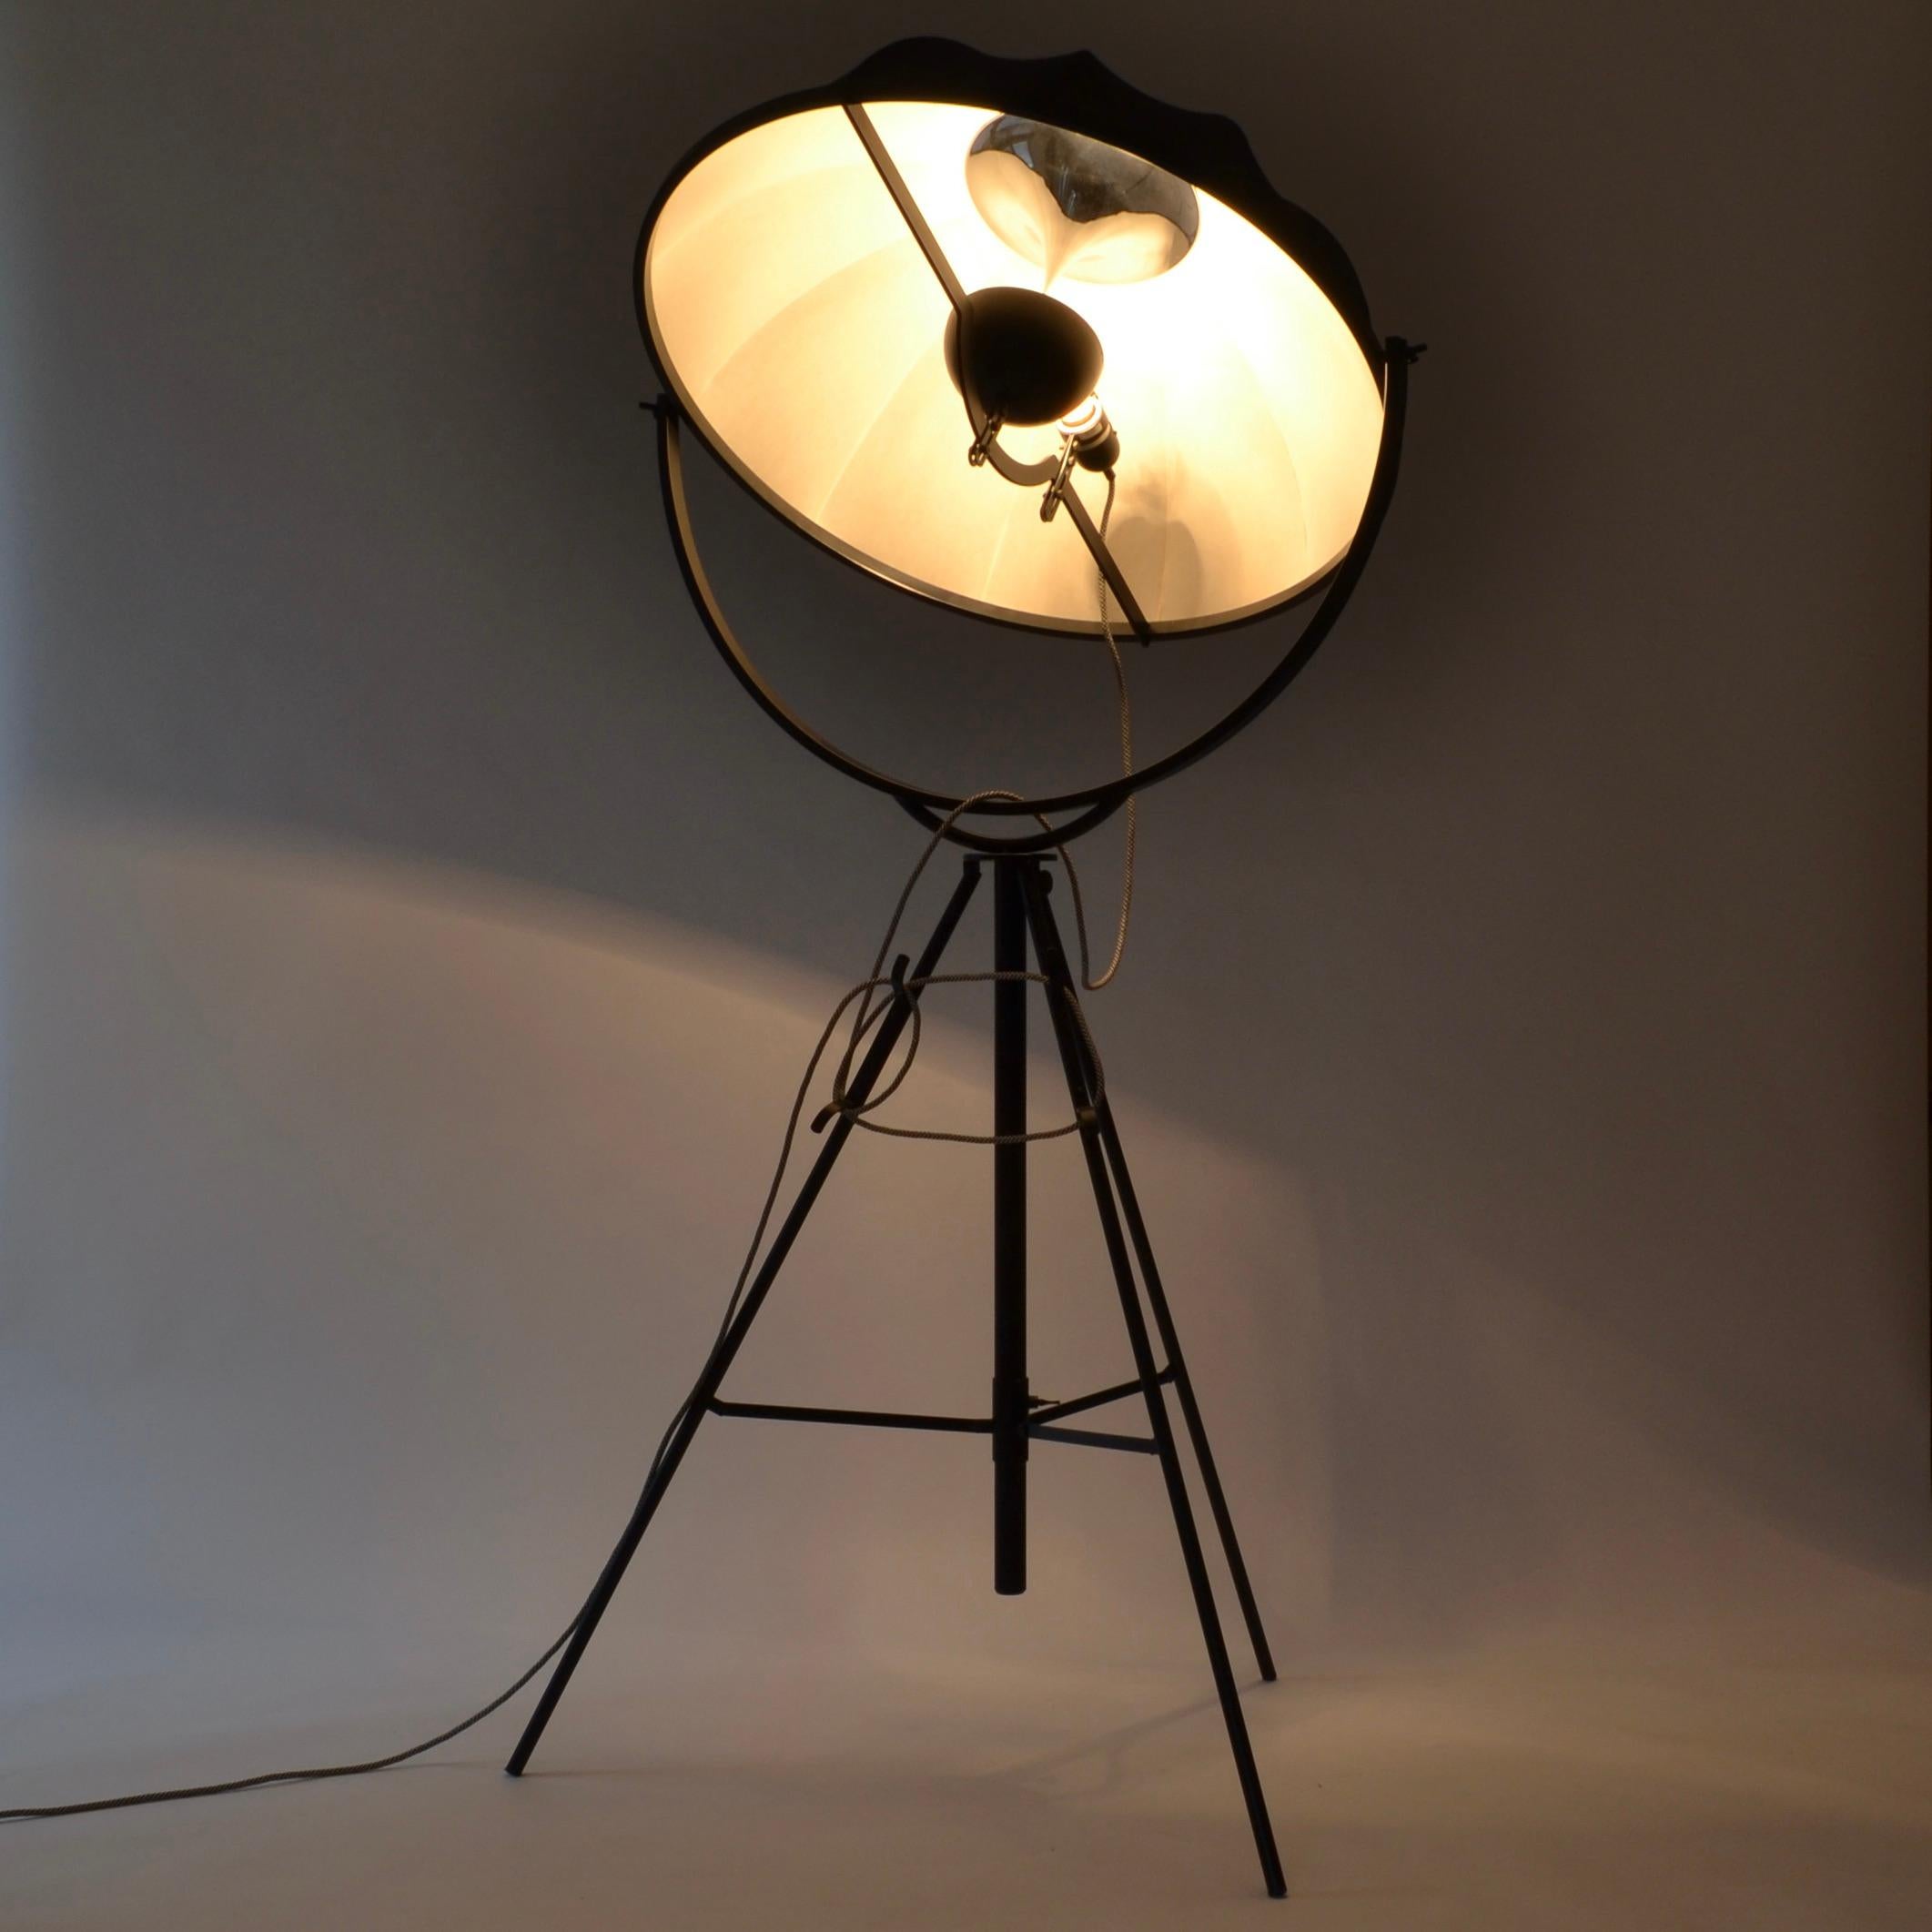 “Time sheds light on everything”, time is what it took for this projector invented at the beginning of the last century to become a real success story only 70 years later...

Created by Mariano Fortuny in 1907 in Italy, this floor lamp